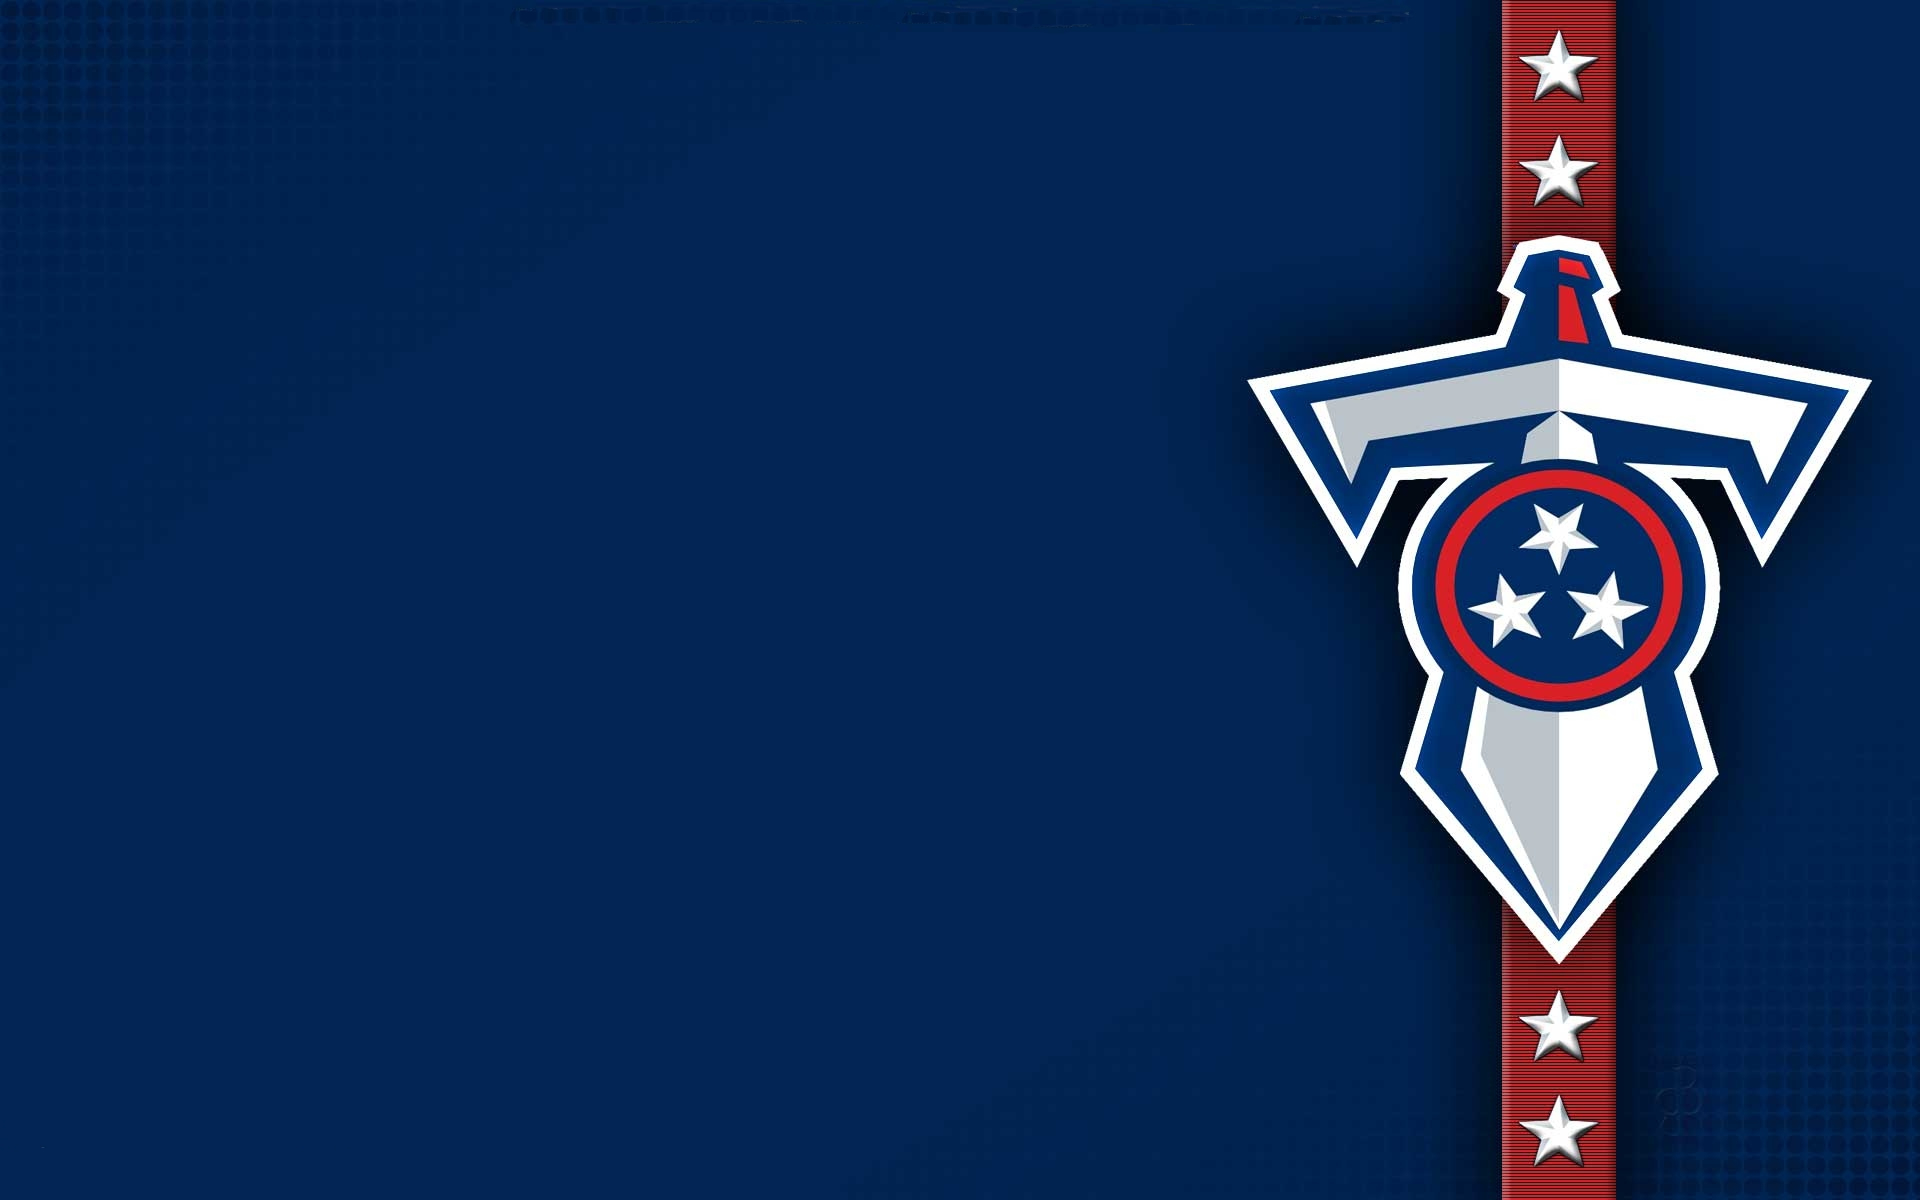 Tennessee Titans download